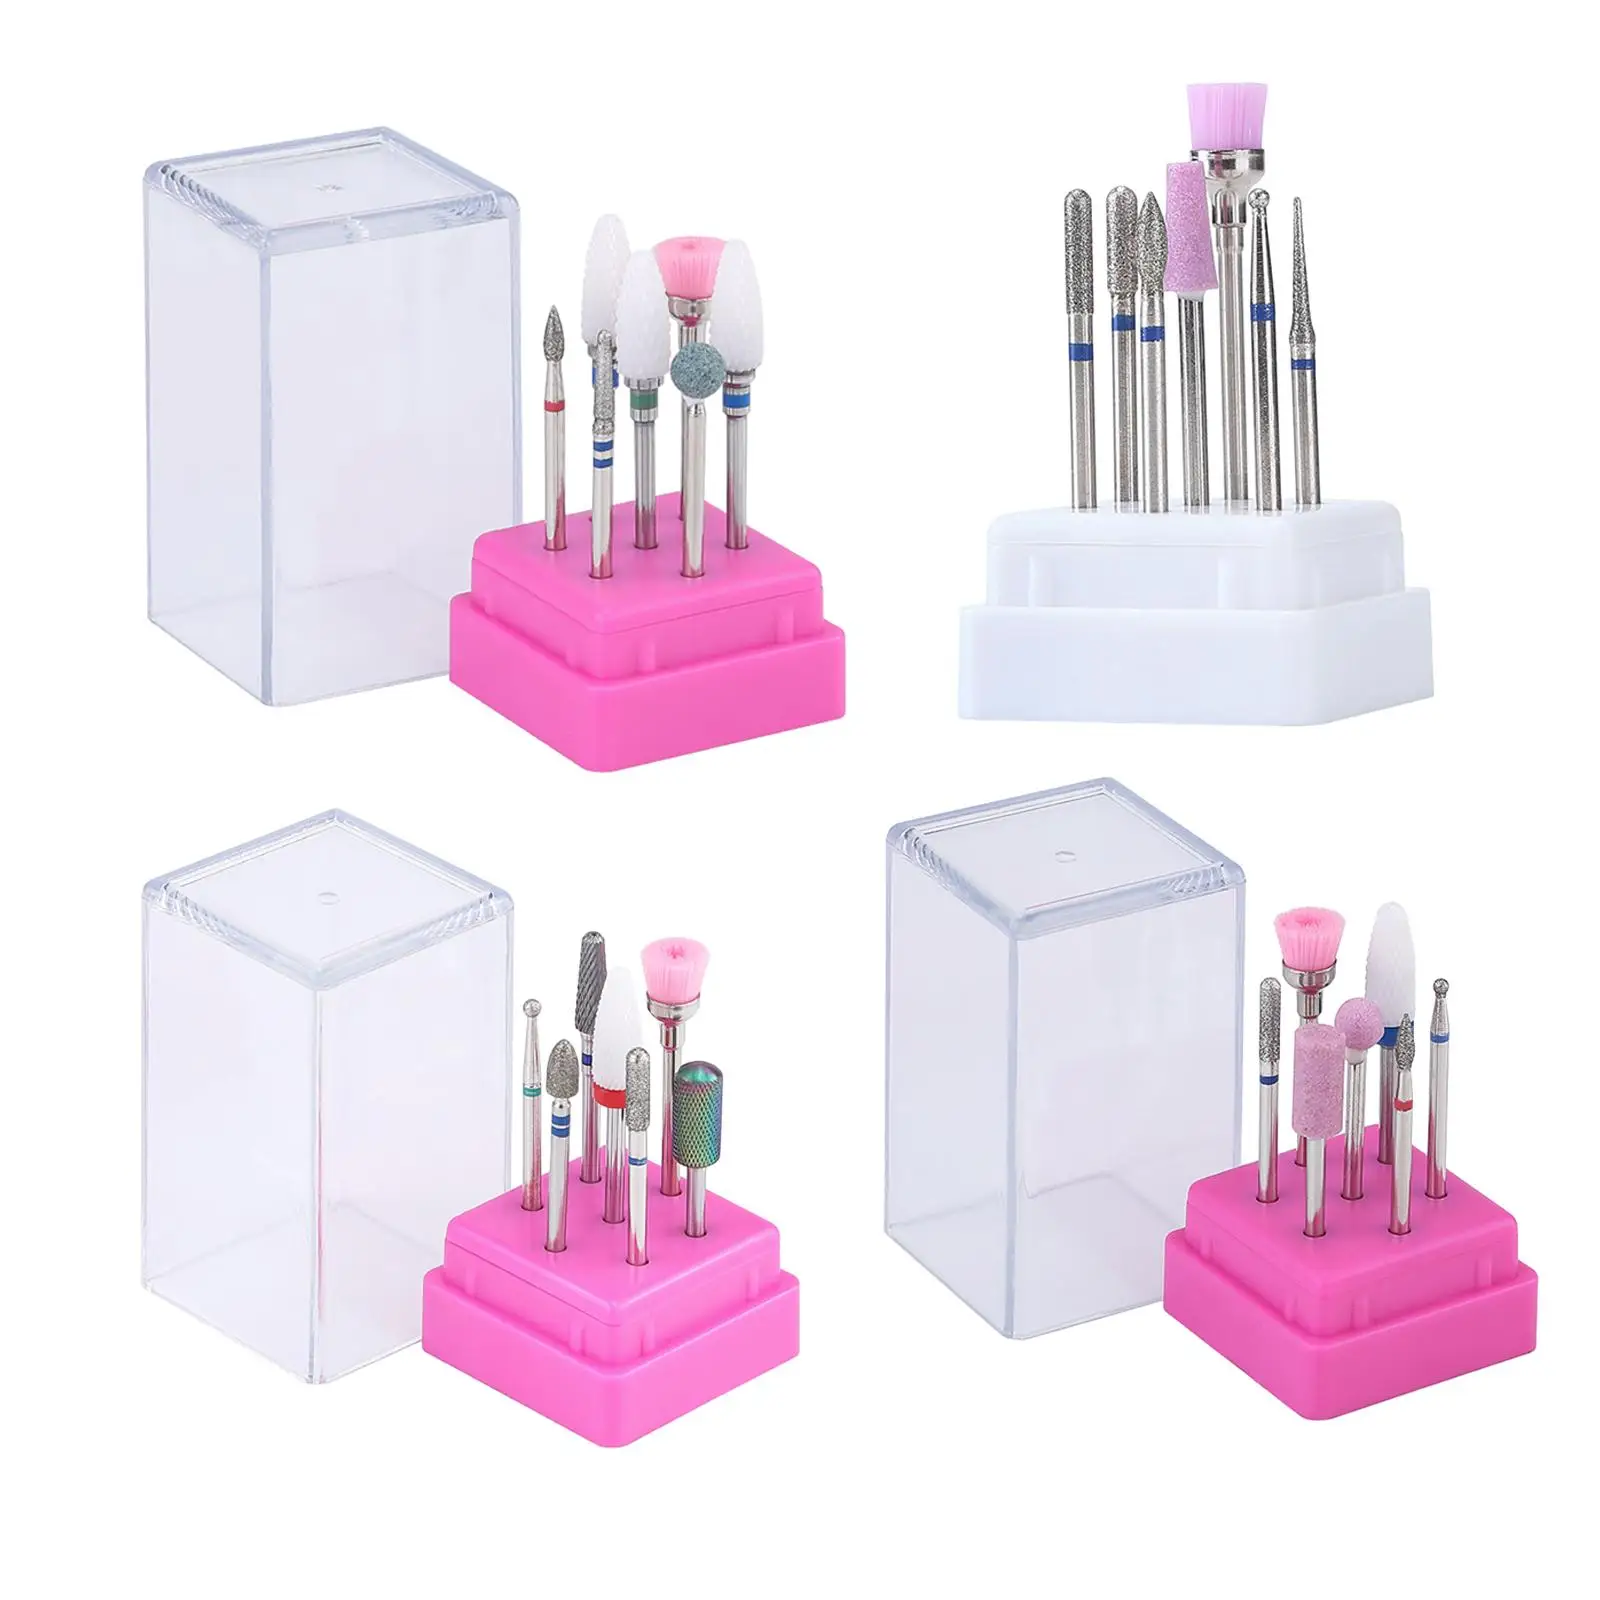 Electric Nail Drill Bits Kit with Holder Box 7Pcs Polishing File Grinding Heads for Pedicure Manicure Nail Polish Manicurists